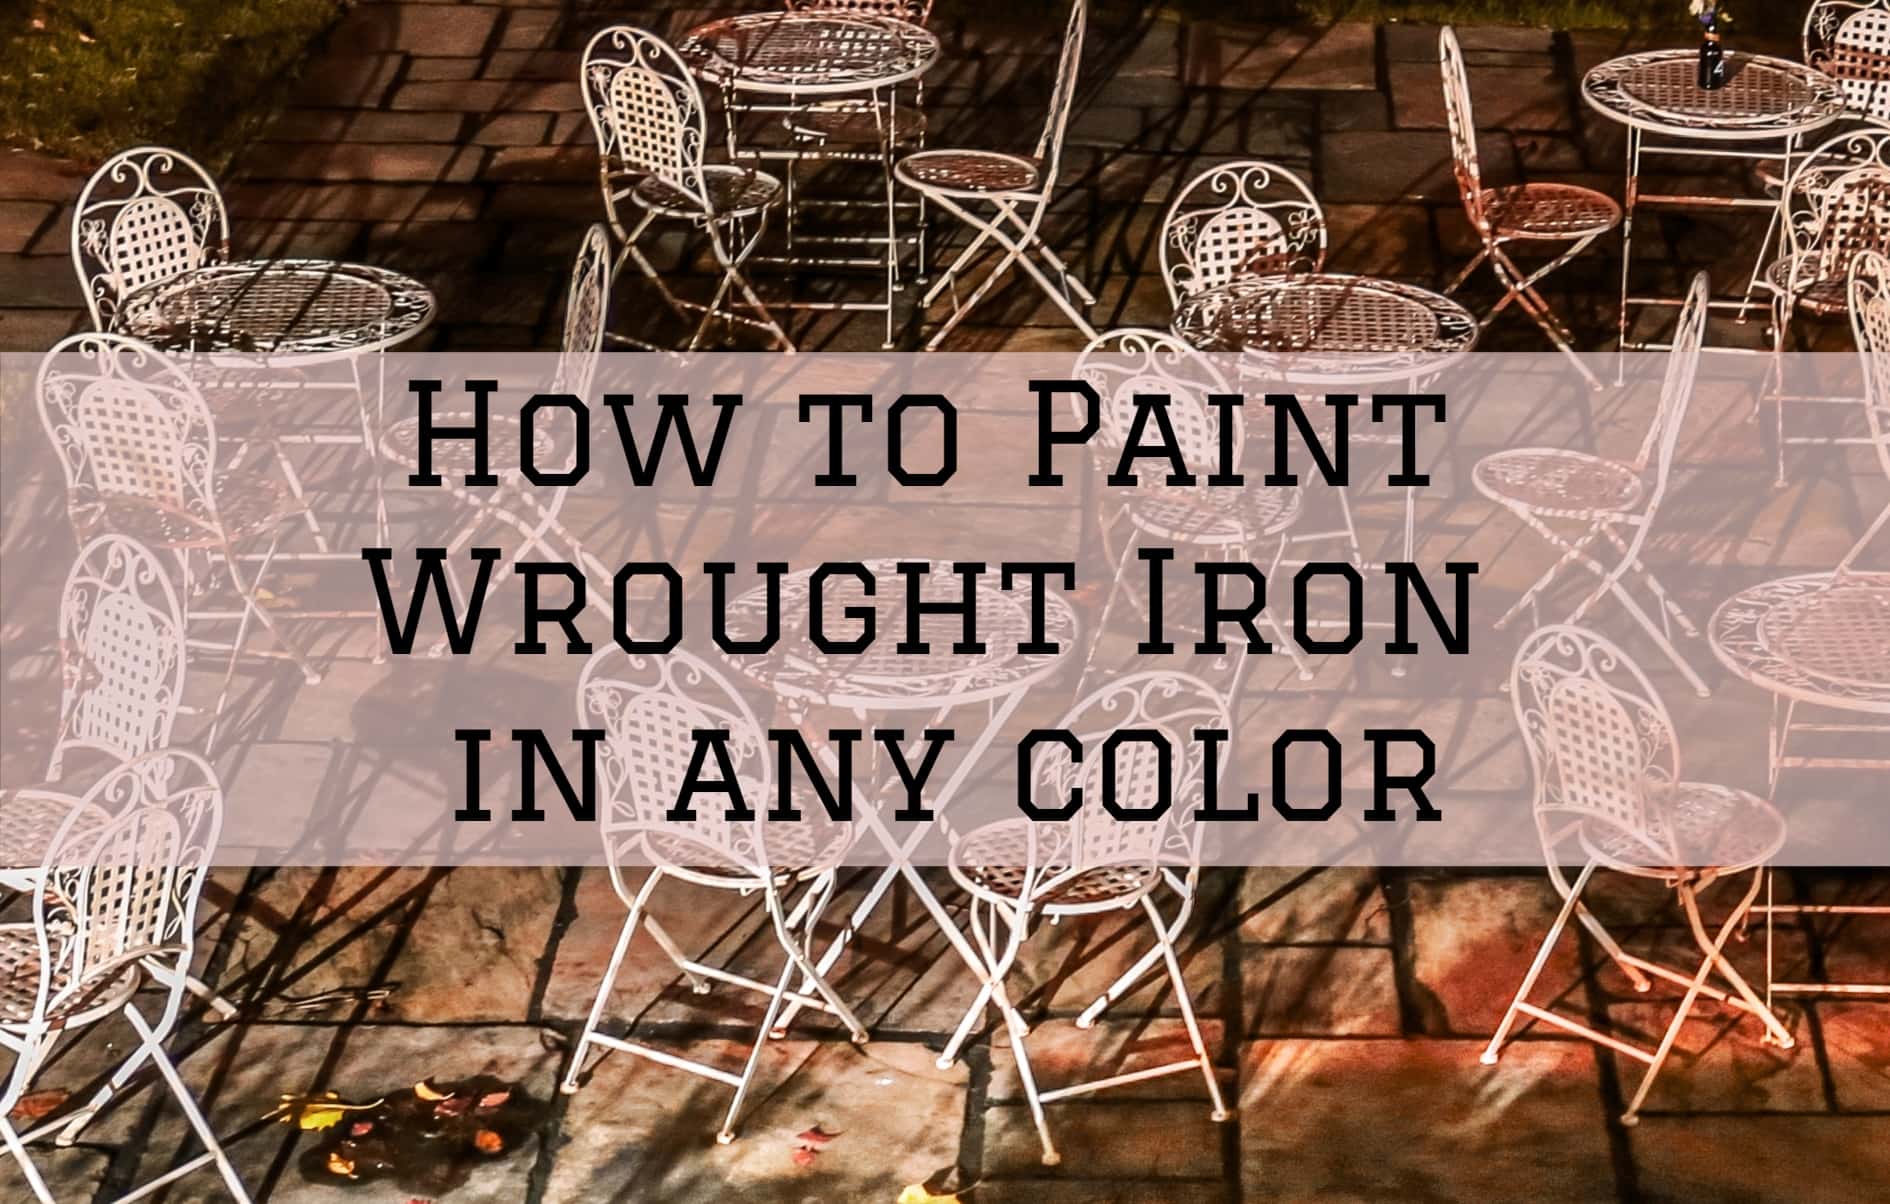 Wrought iron painting, Wrought iron repainting